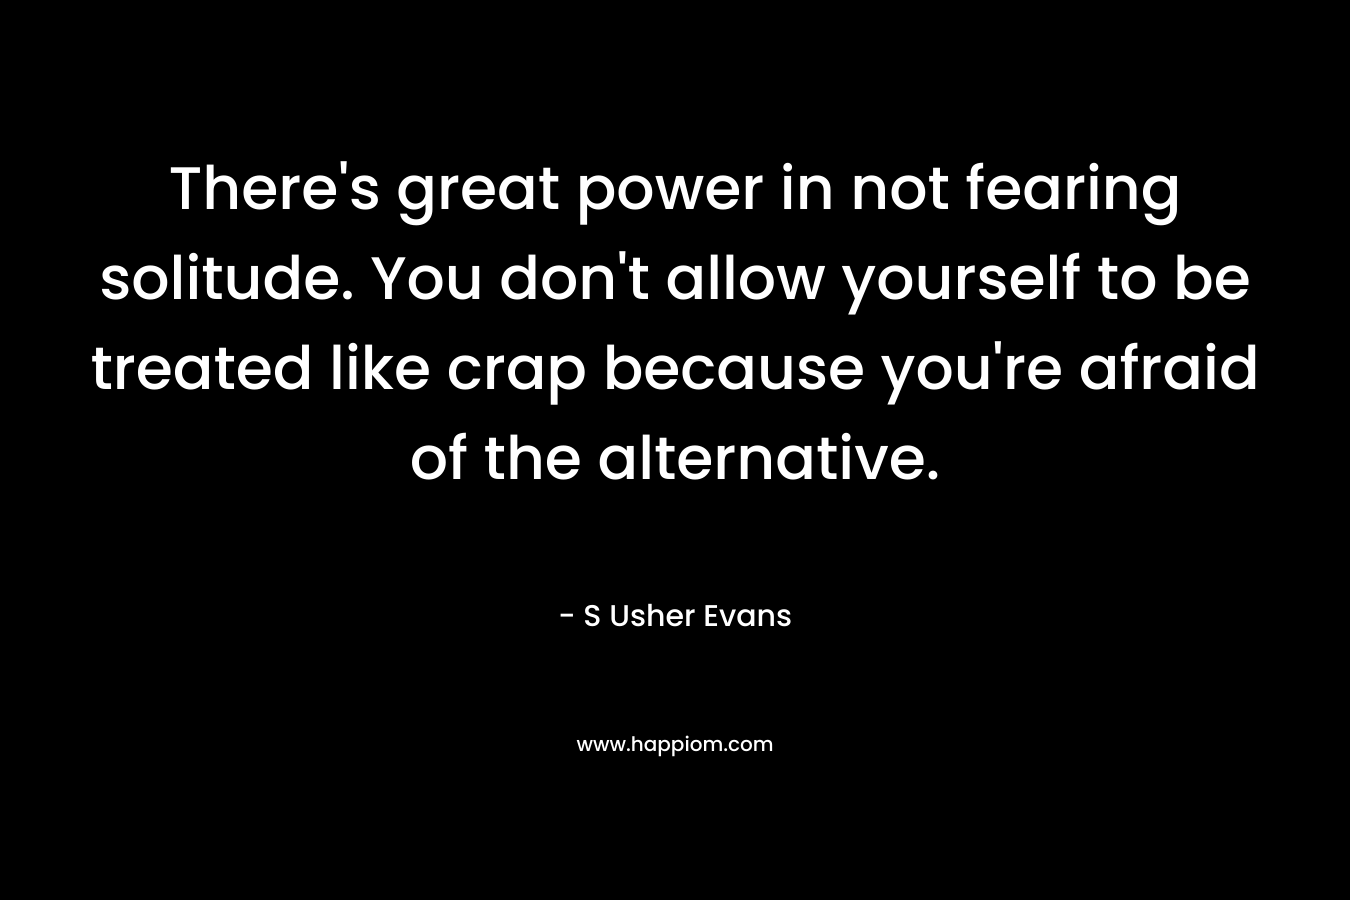 There's great power in not fearing solitude. You don't allow yourself to be treated like crap because you're afraid of the alternative.